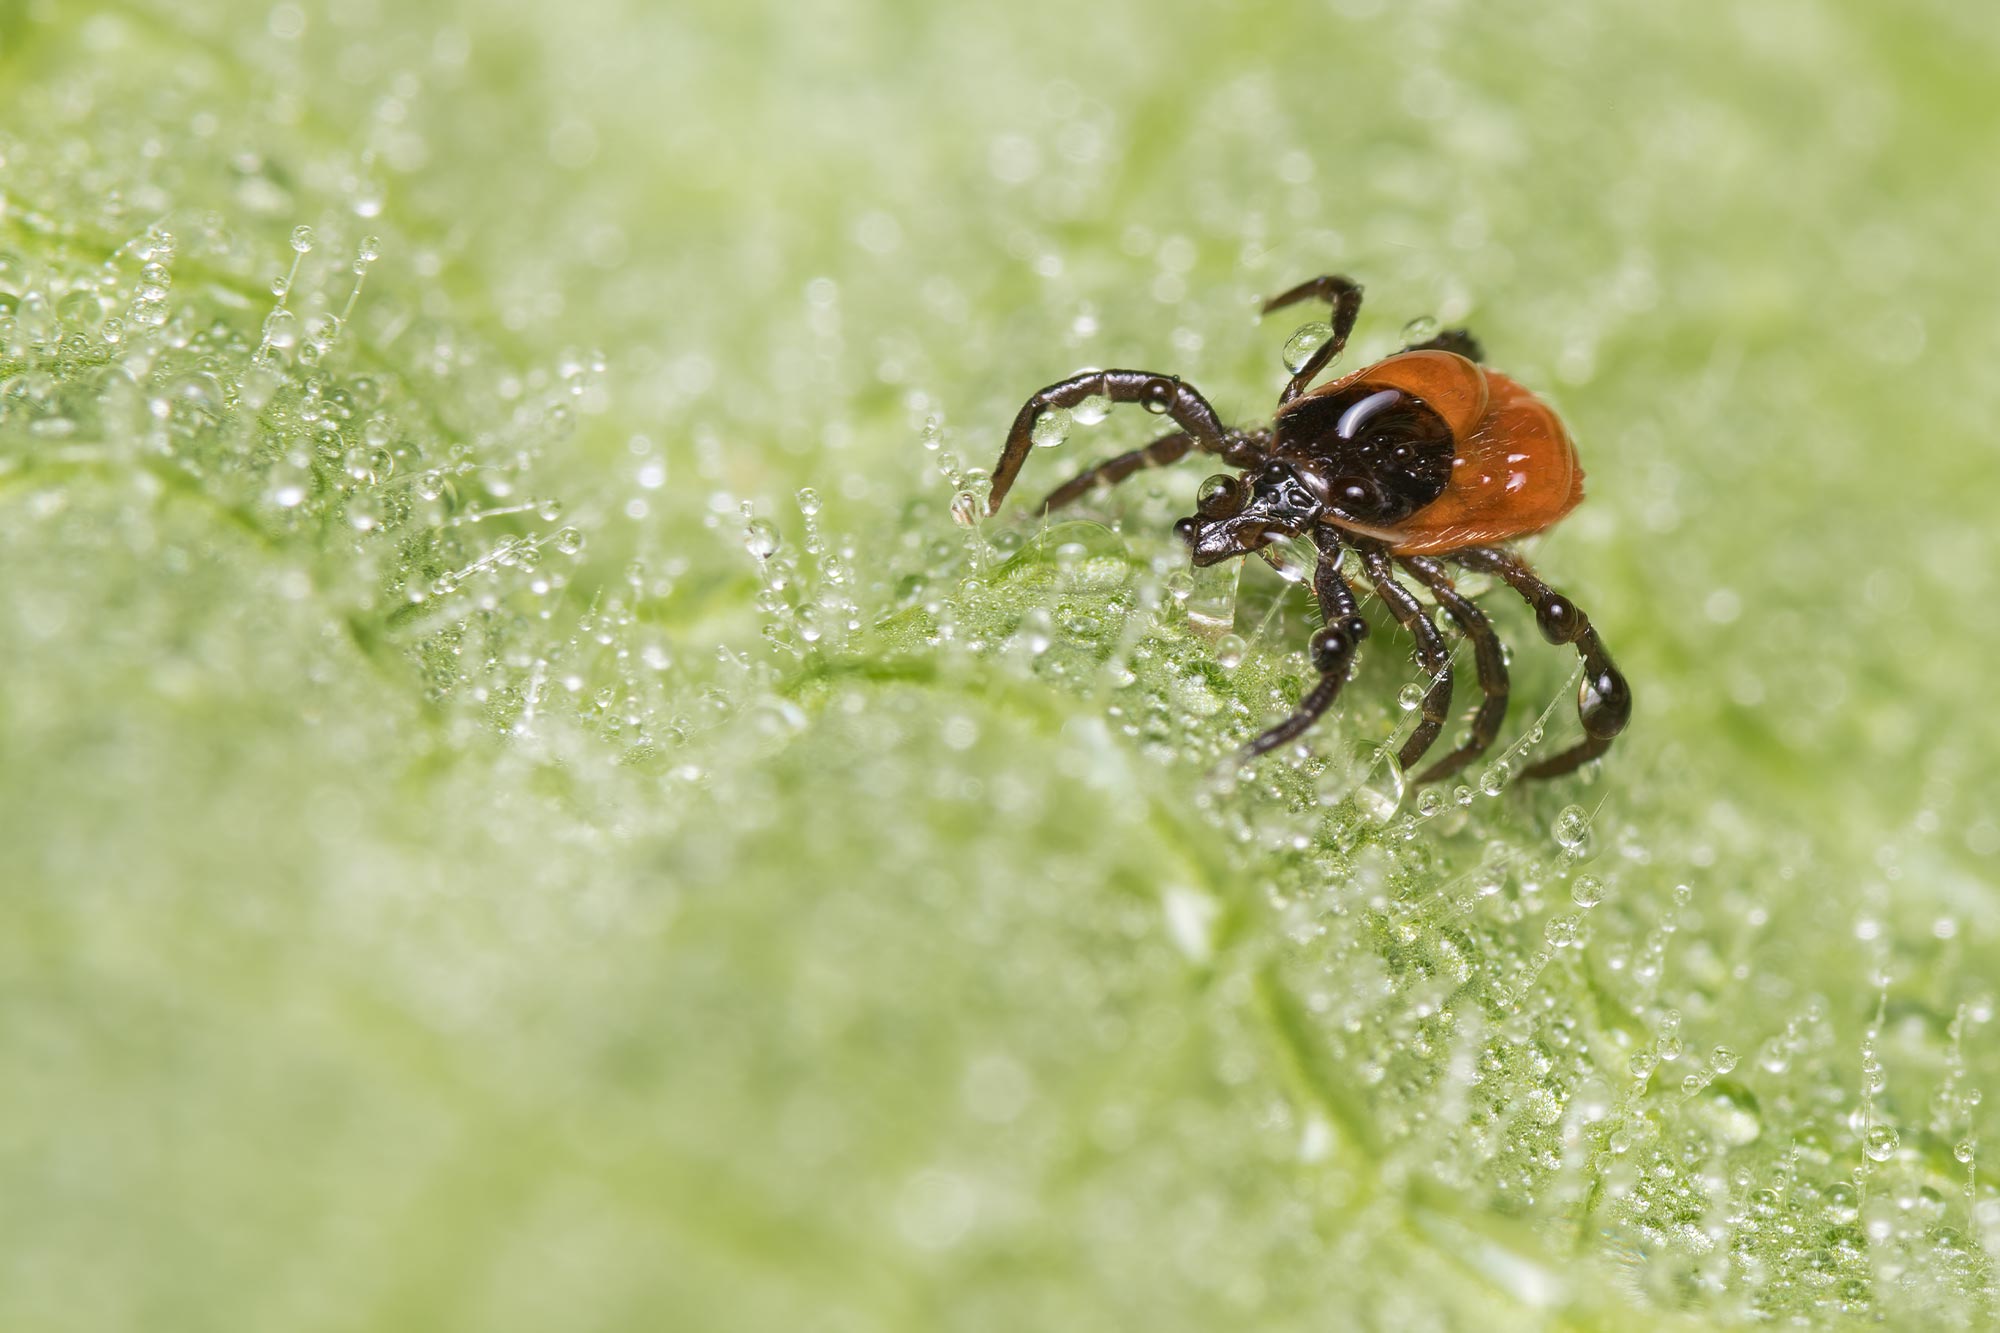 Deer tick season is early, thanks to global warming.  Here’s what you need to know